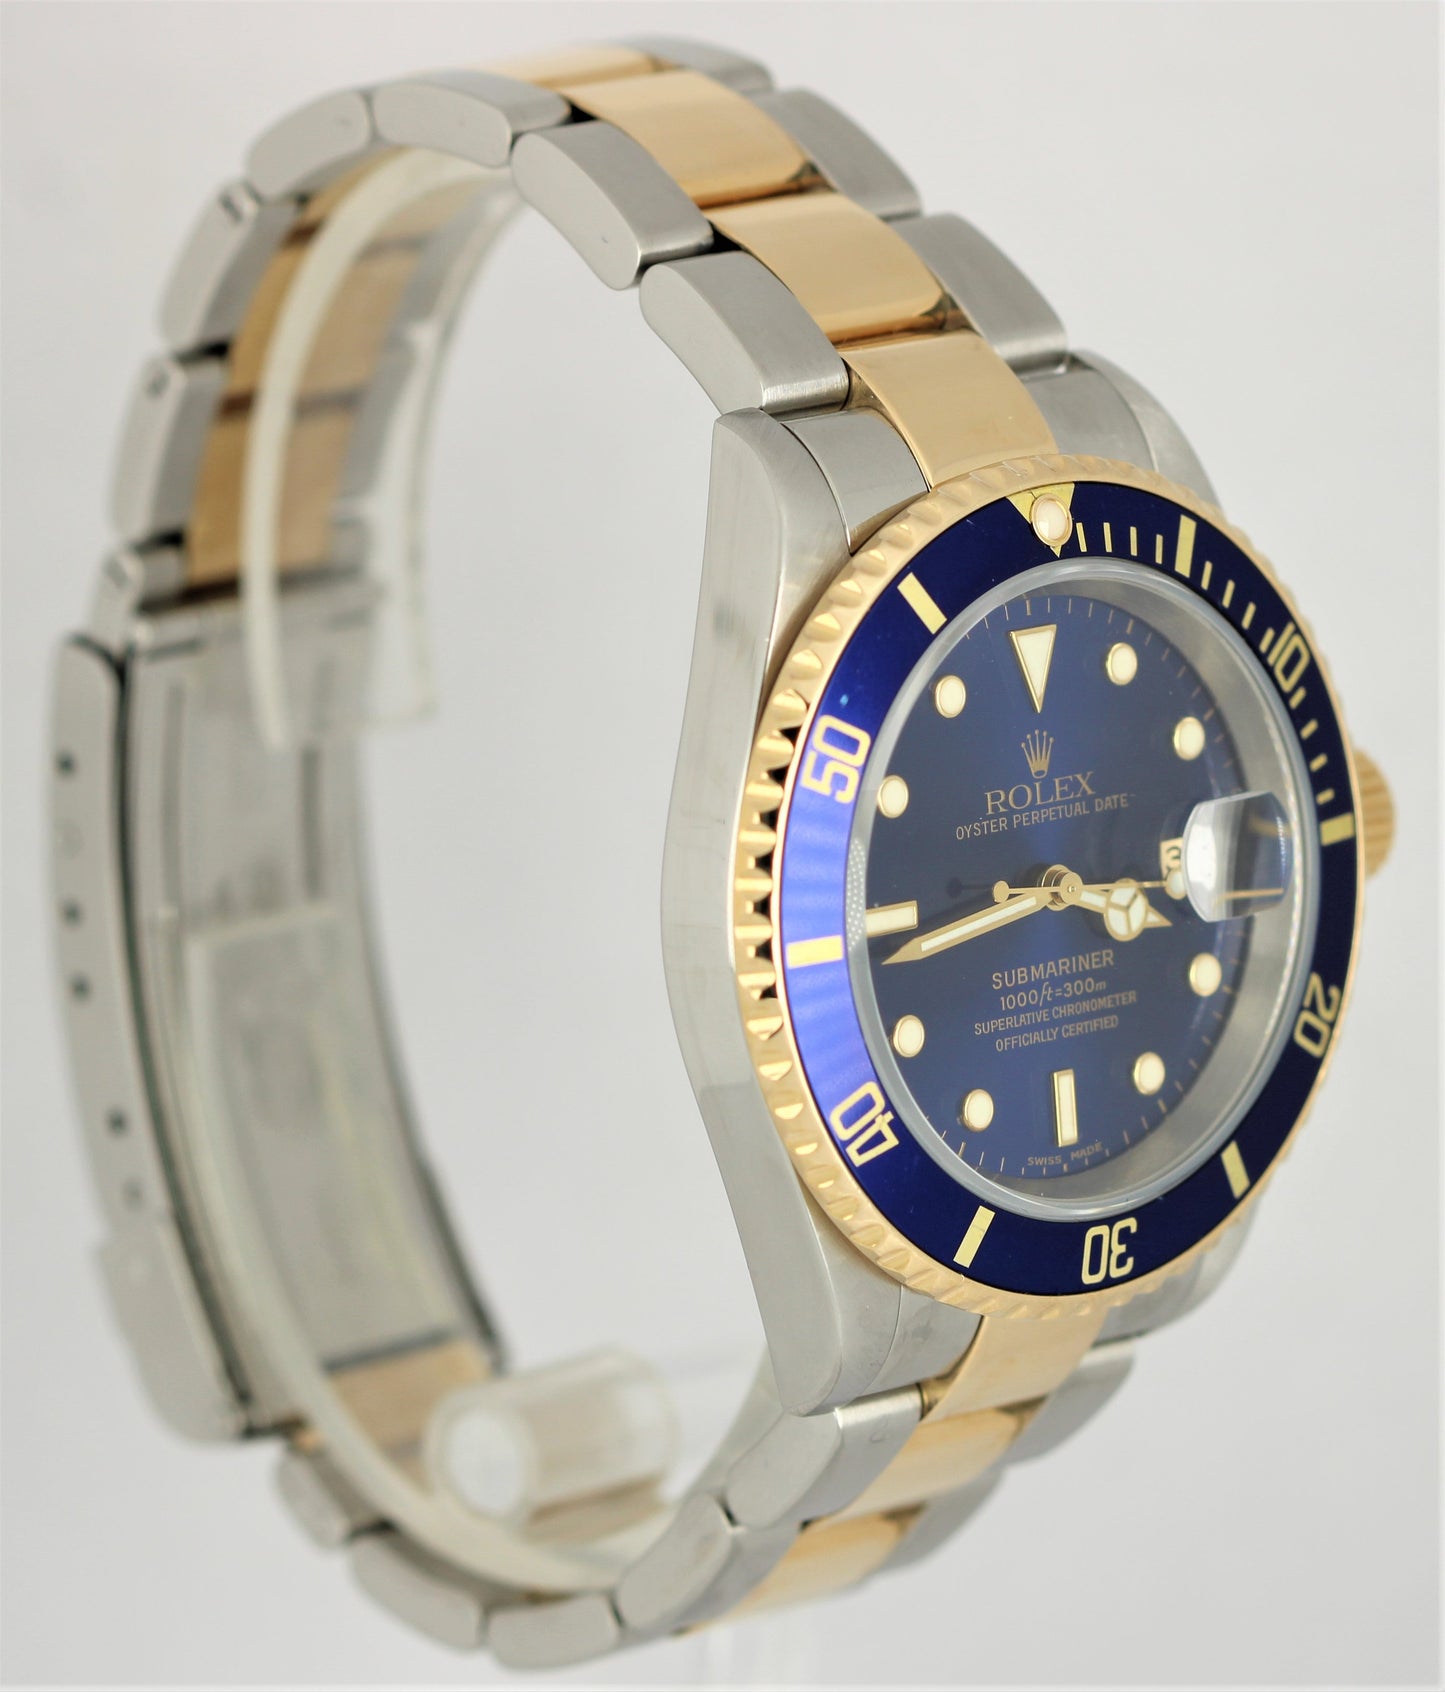 Rolex Submariner Date Two-Tone 18k Steel NO HOLES Blue 40mm 16613 LB Watch